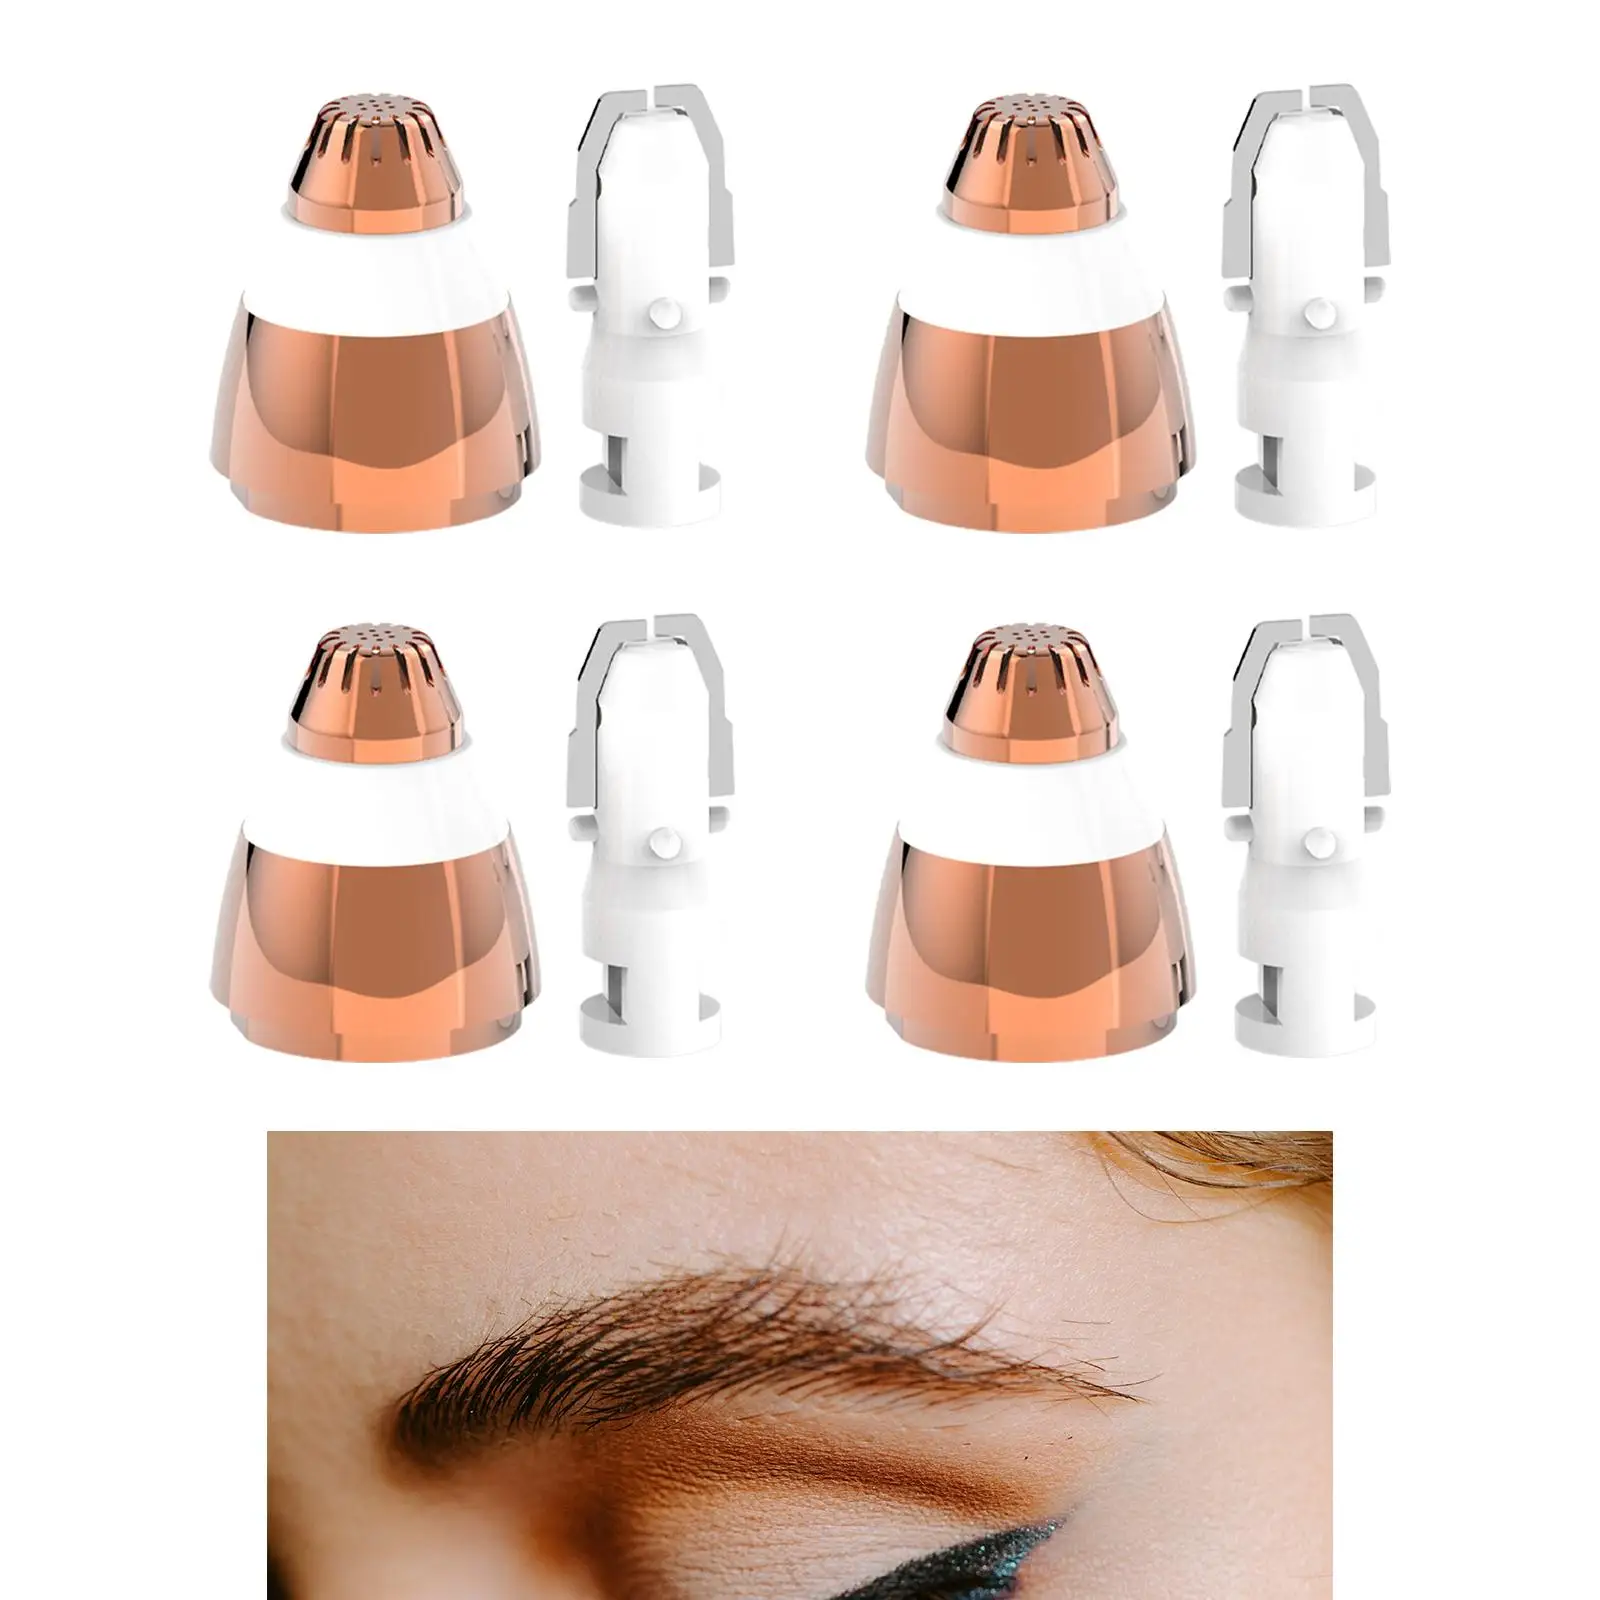 4 Sets Eyebrow Trimmer Replacement Heads Eyebrow Facial Hair Removal Tool Parts